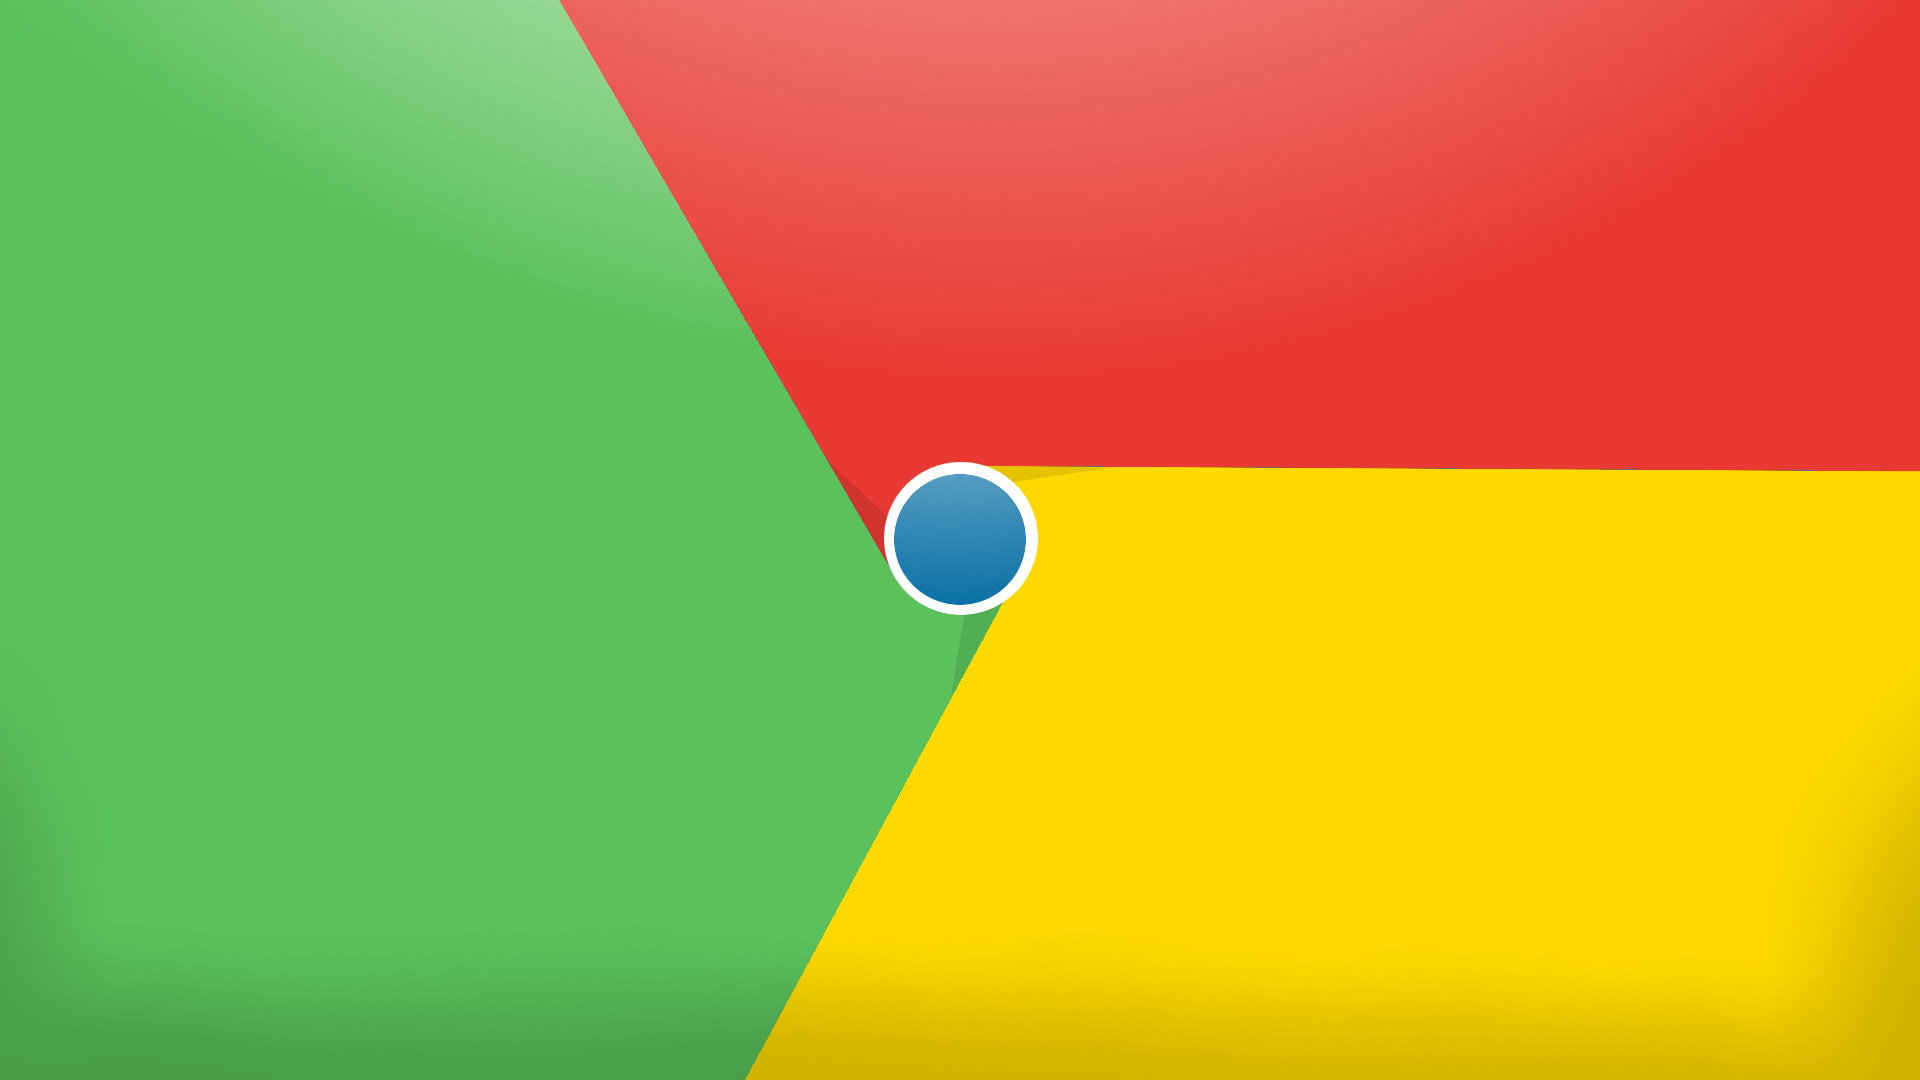 General 1920x1080 Google Google Chrome colorful browser software